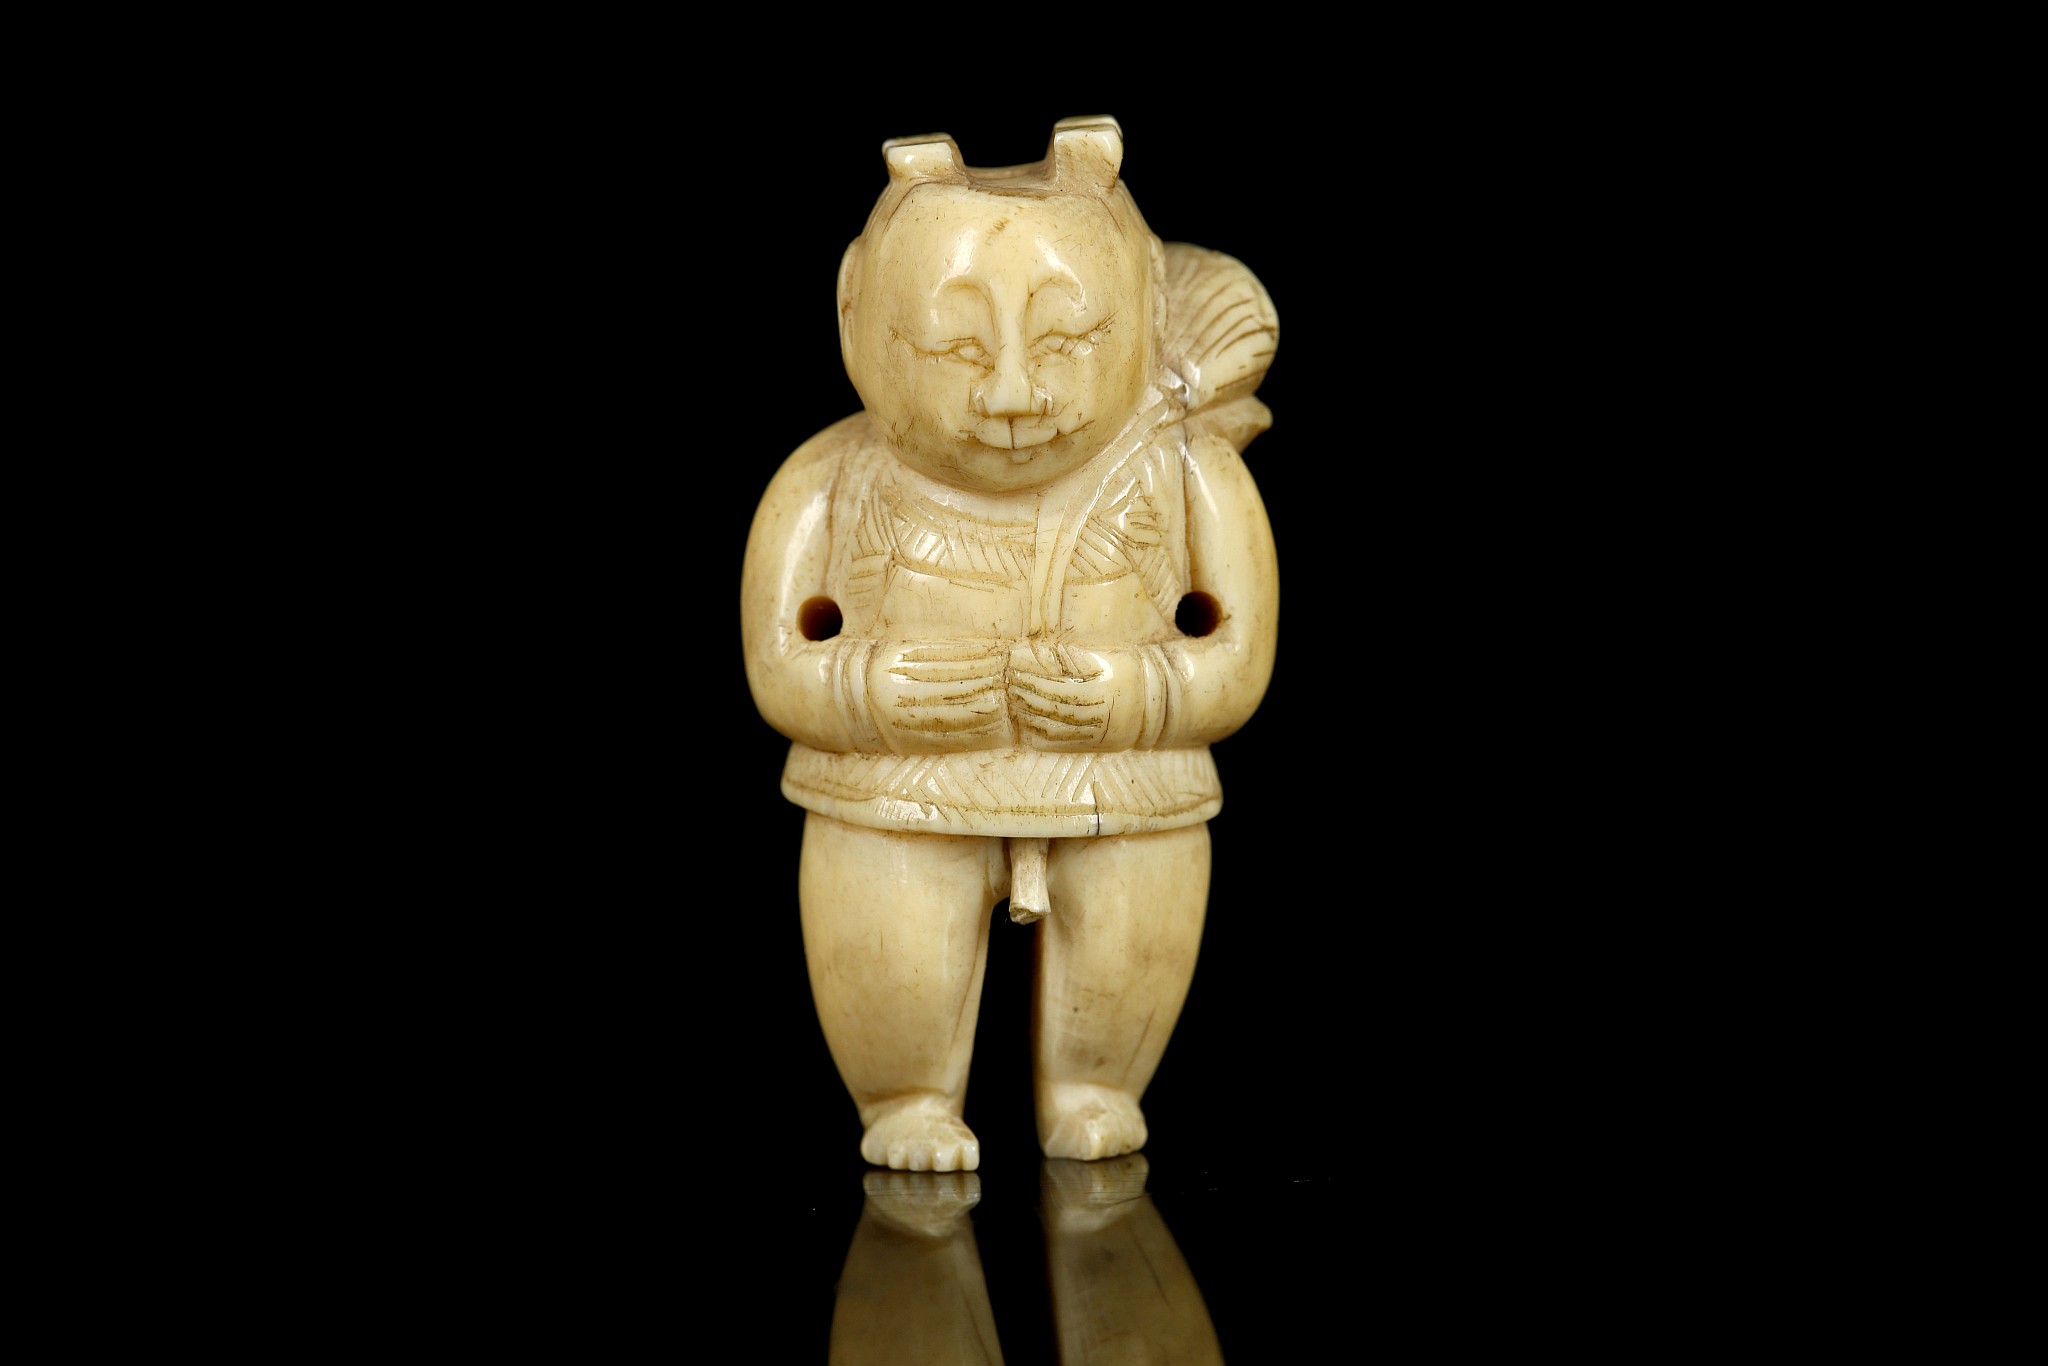 A JAPANESE IVORY NETSUKE FORMED AS A BOY. Meiji Period. Carved standing and holding a lotus